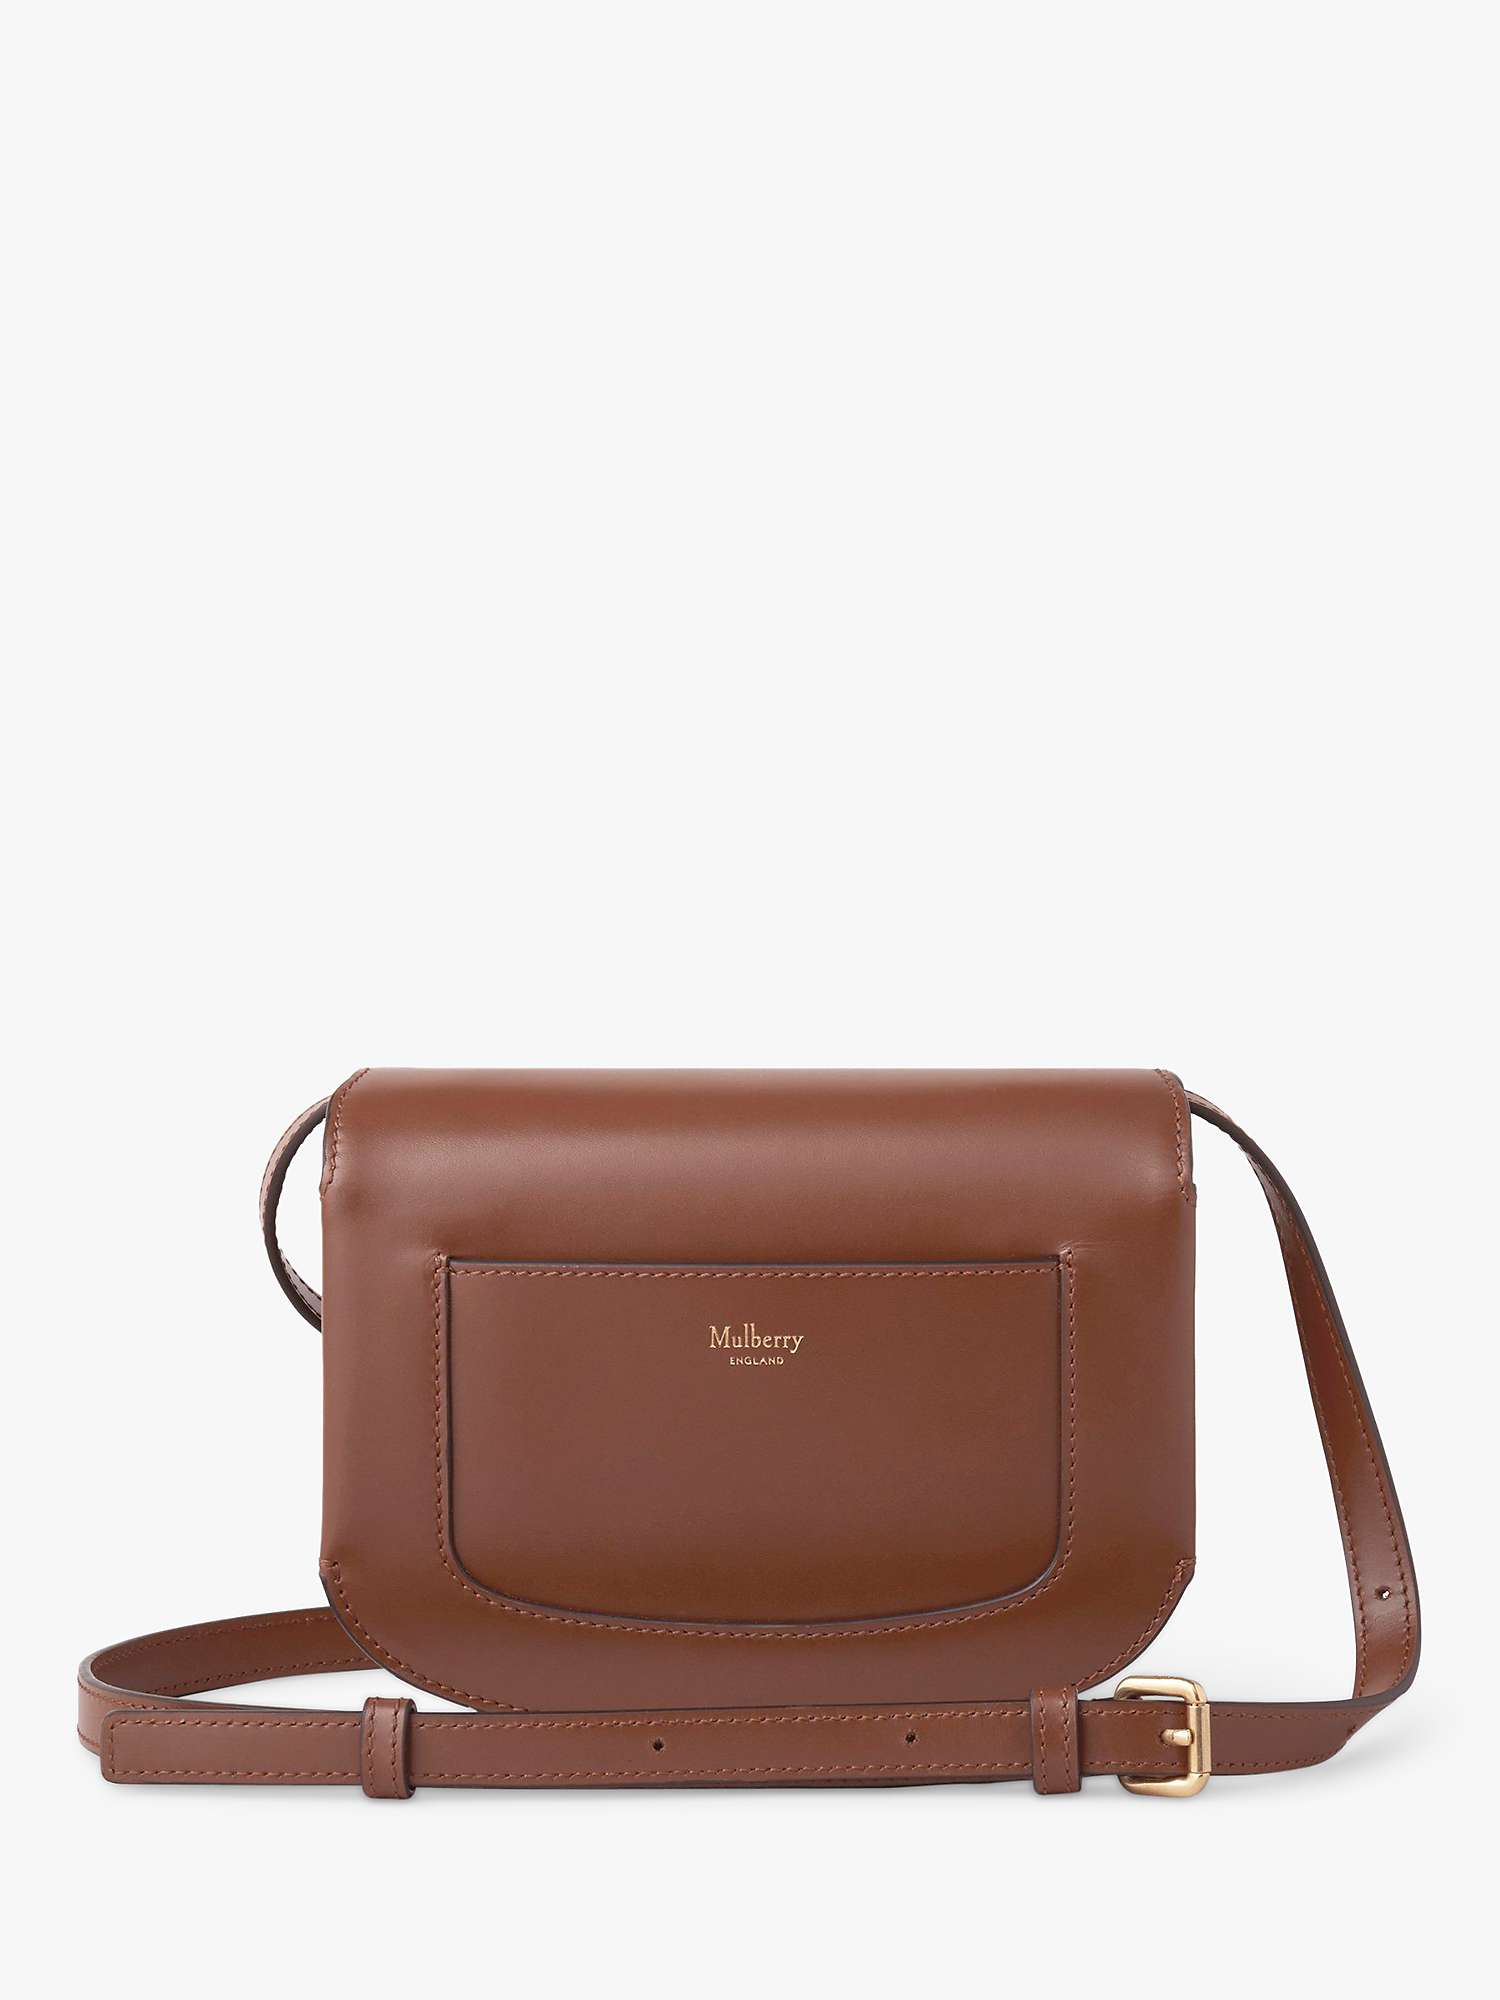 Buy Mulberry Small Pimlico Satchel Bag, Bright Oak Online at johnlewis.com